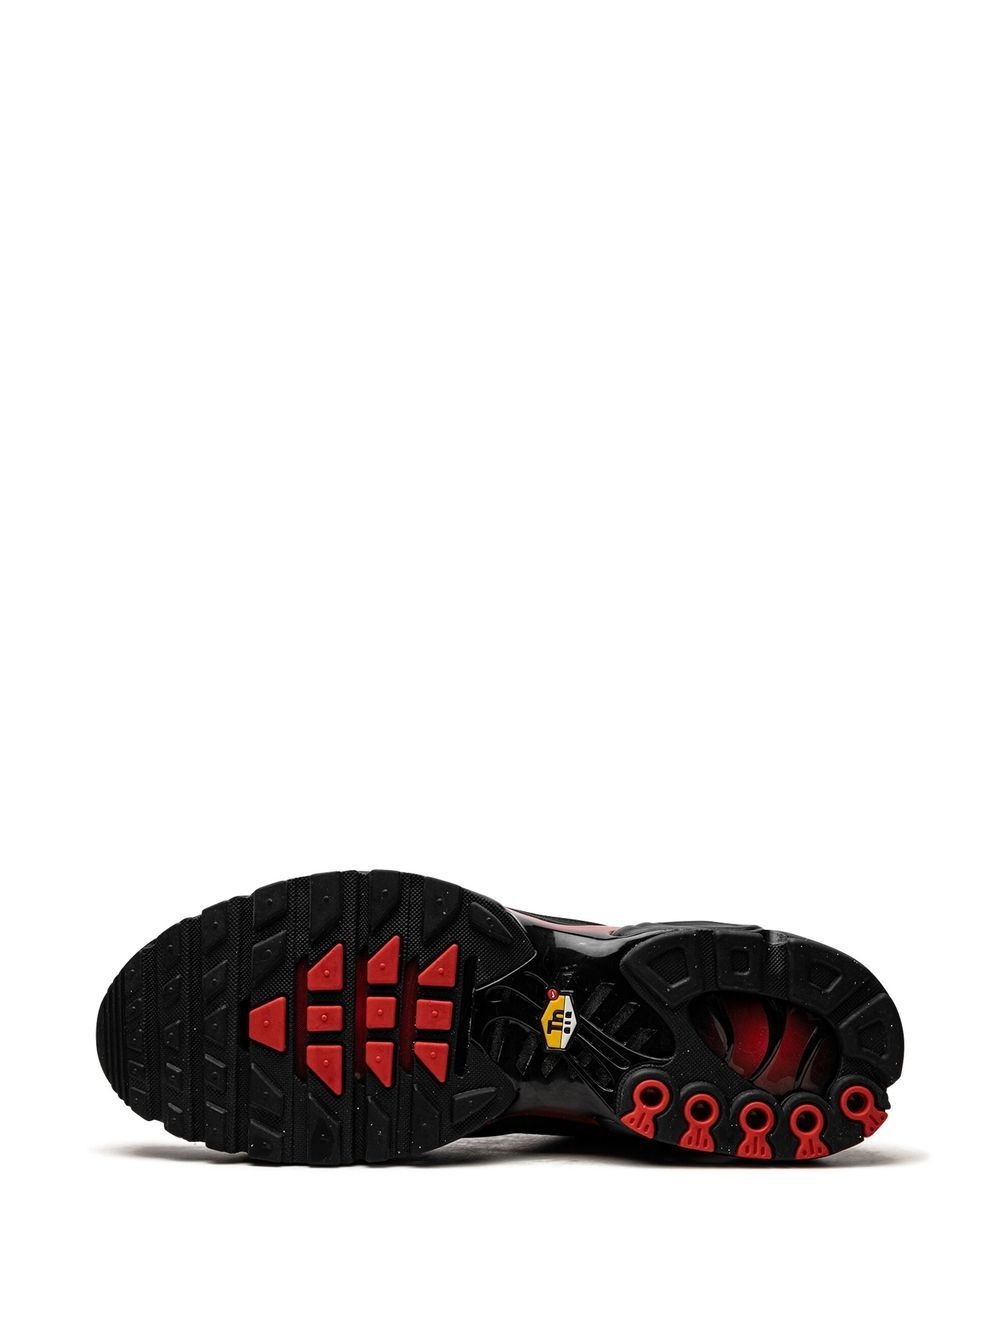 Air Max Plus "Bred Reflective" sneakers - 4